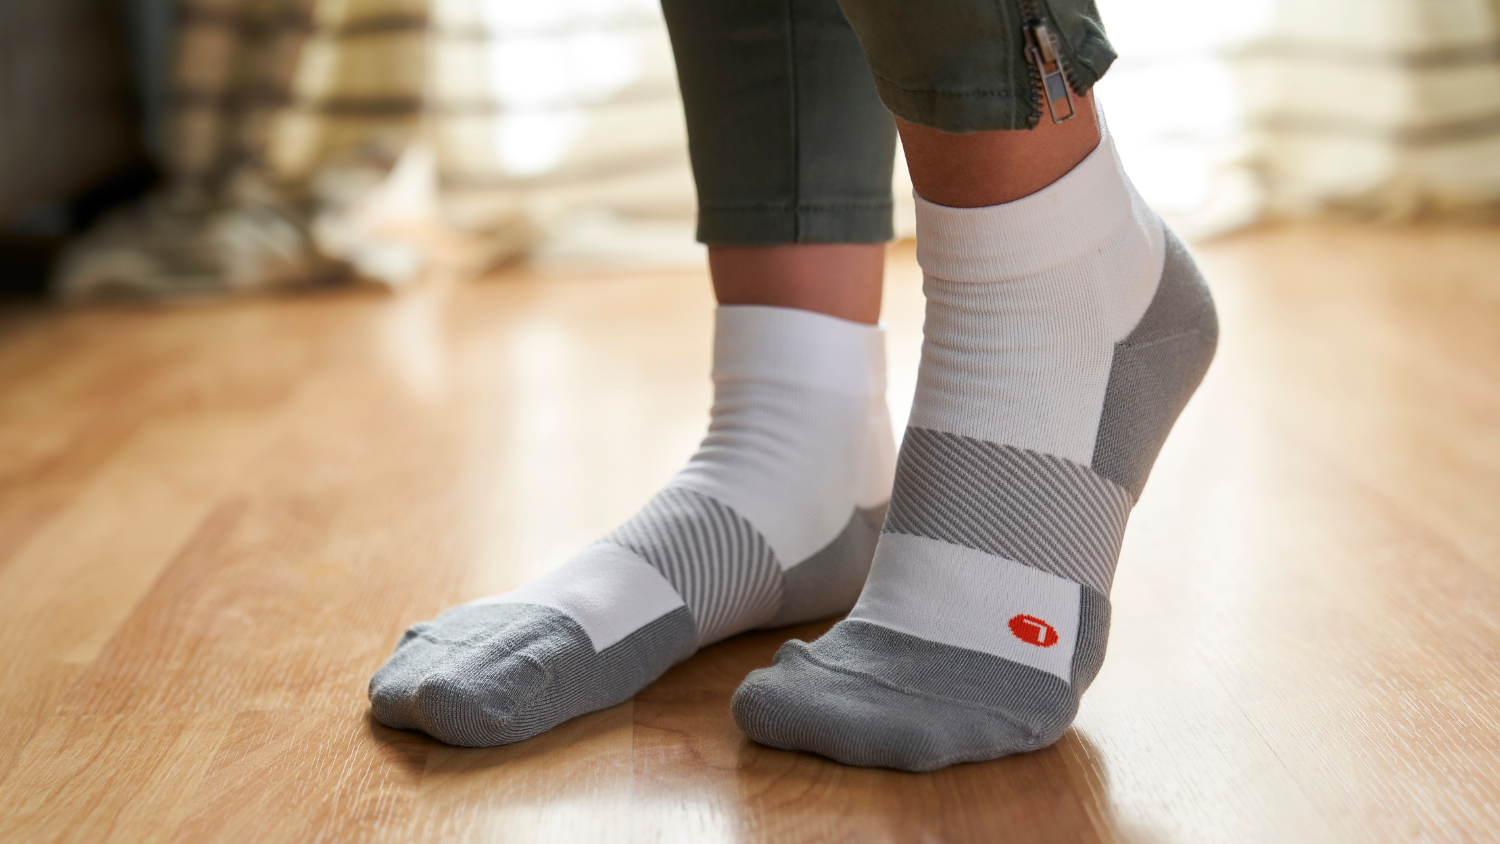 Components and Benefits of Diabetic Socks